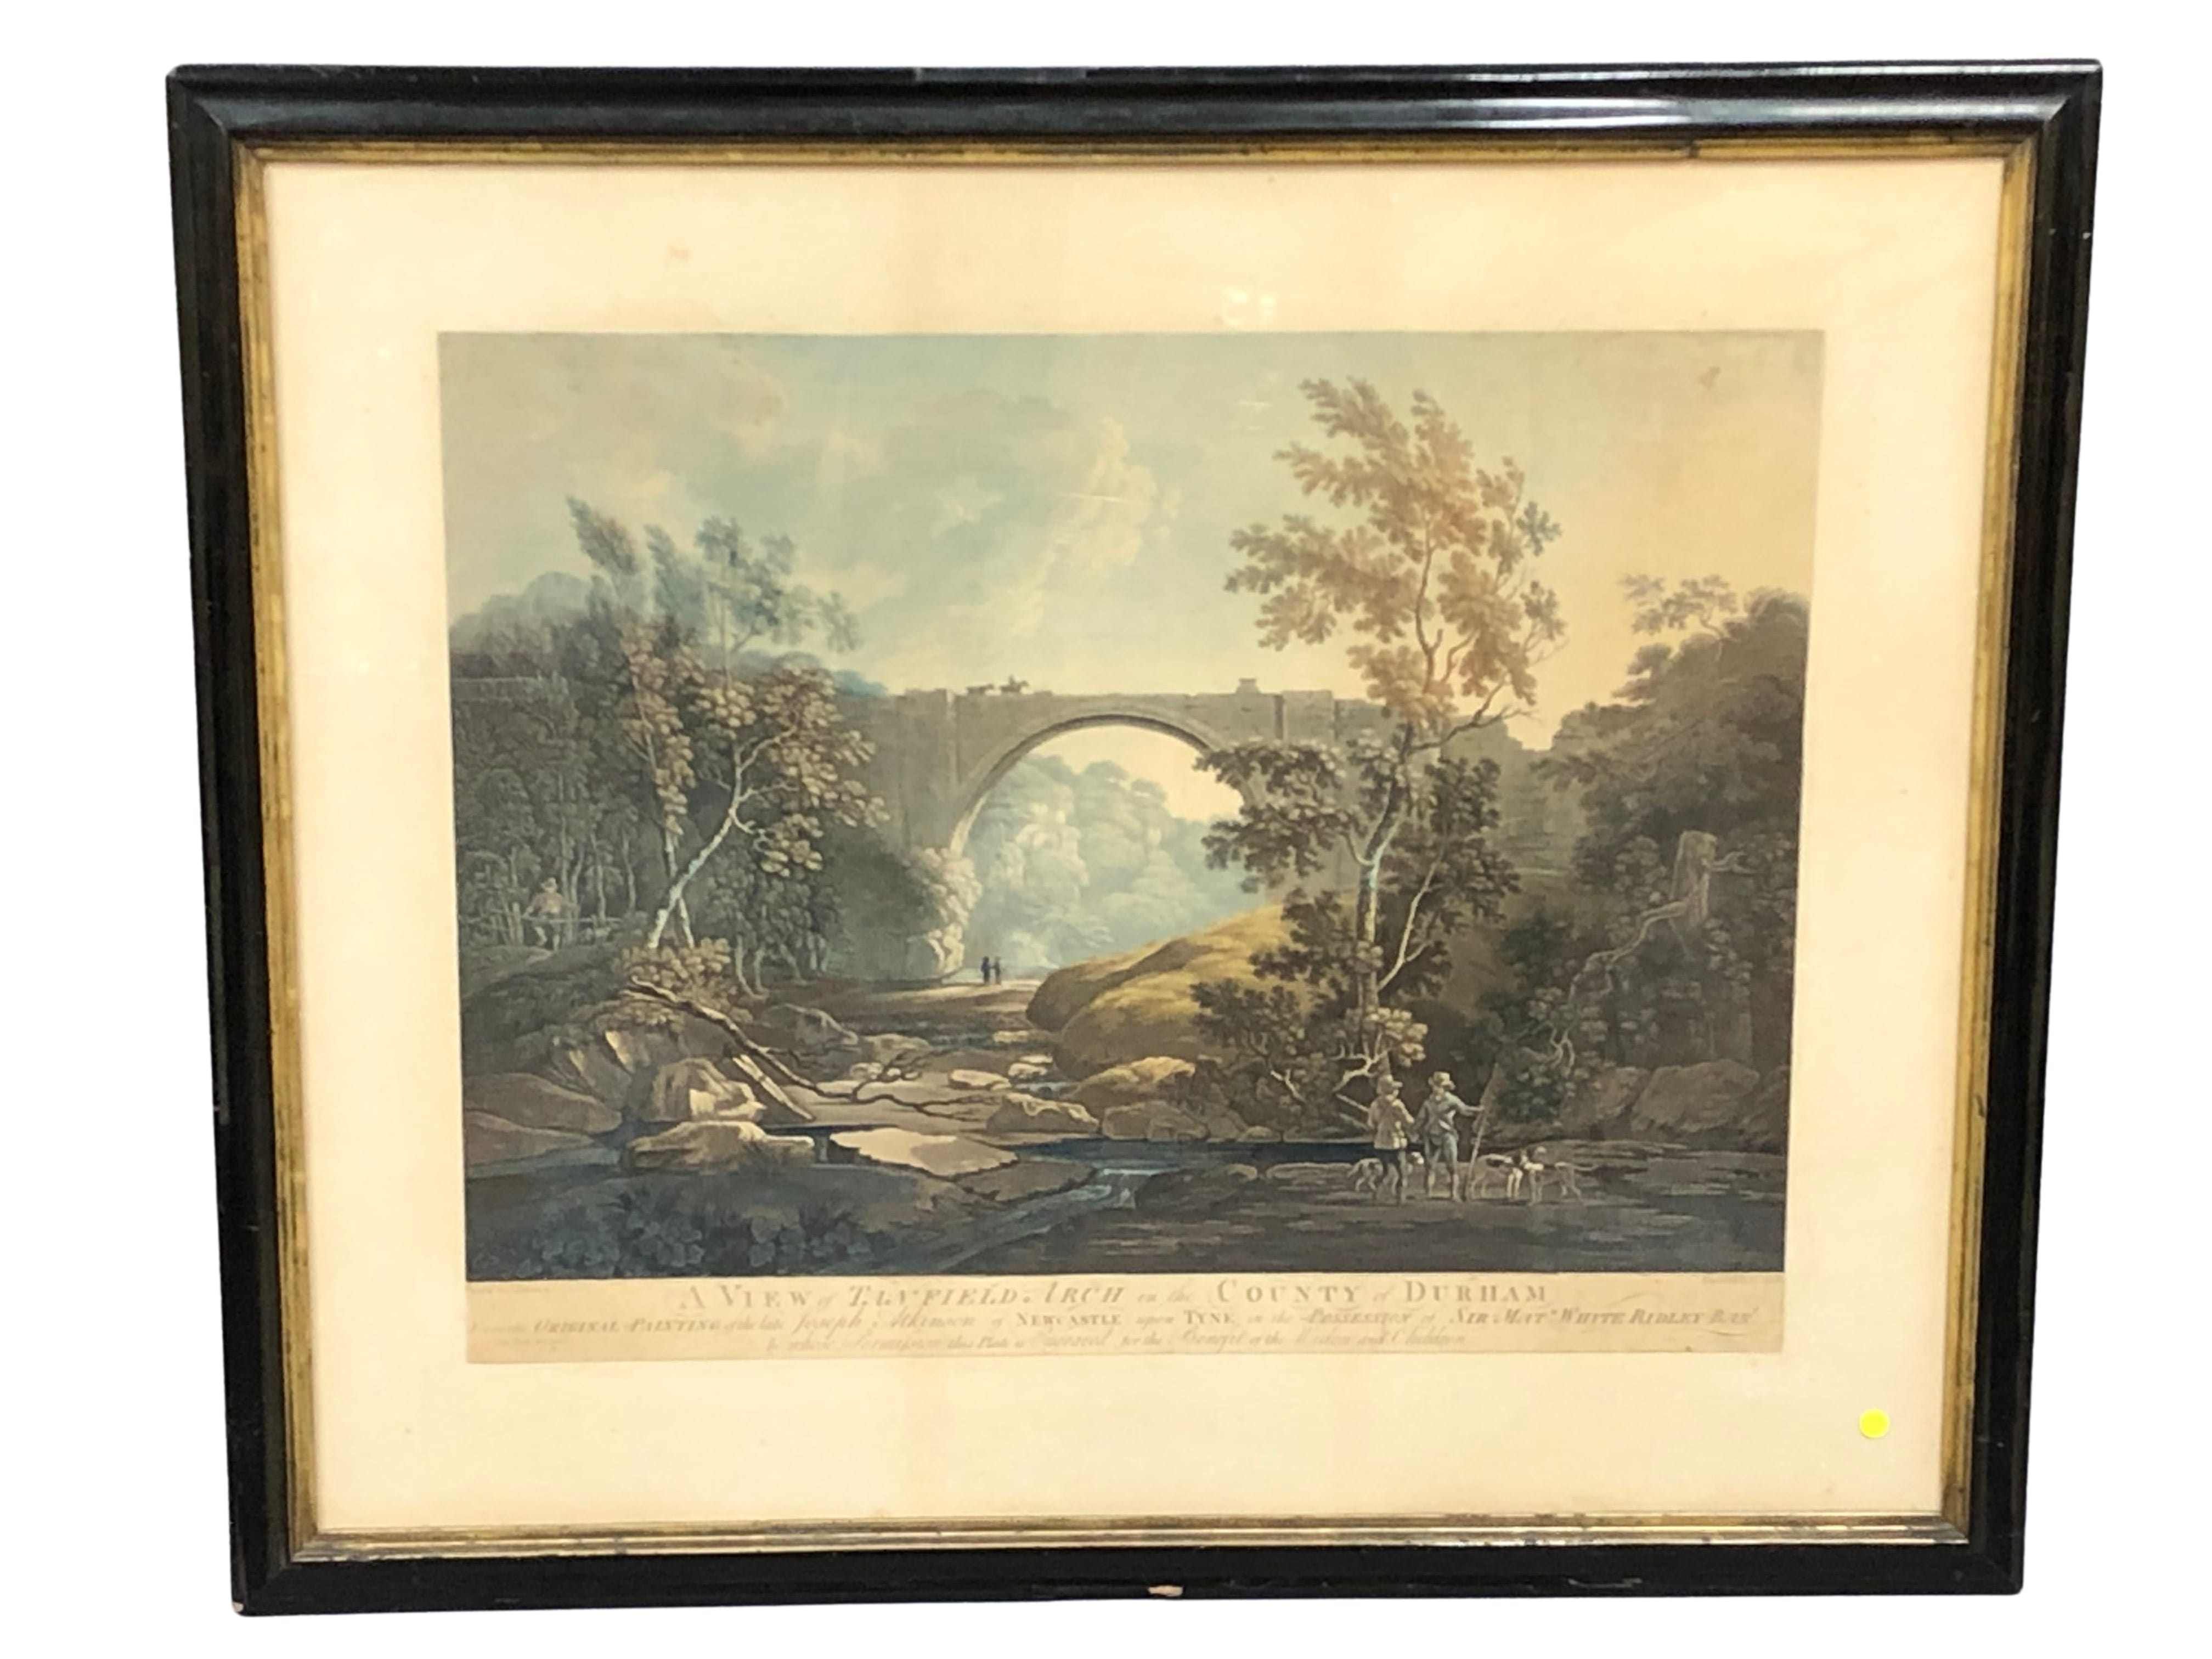 Joseph Constantin Stadler (Engraver) : A View of Tanfield Arch in the County of Durham,